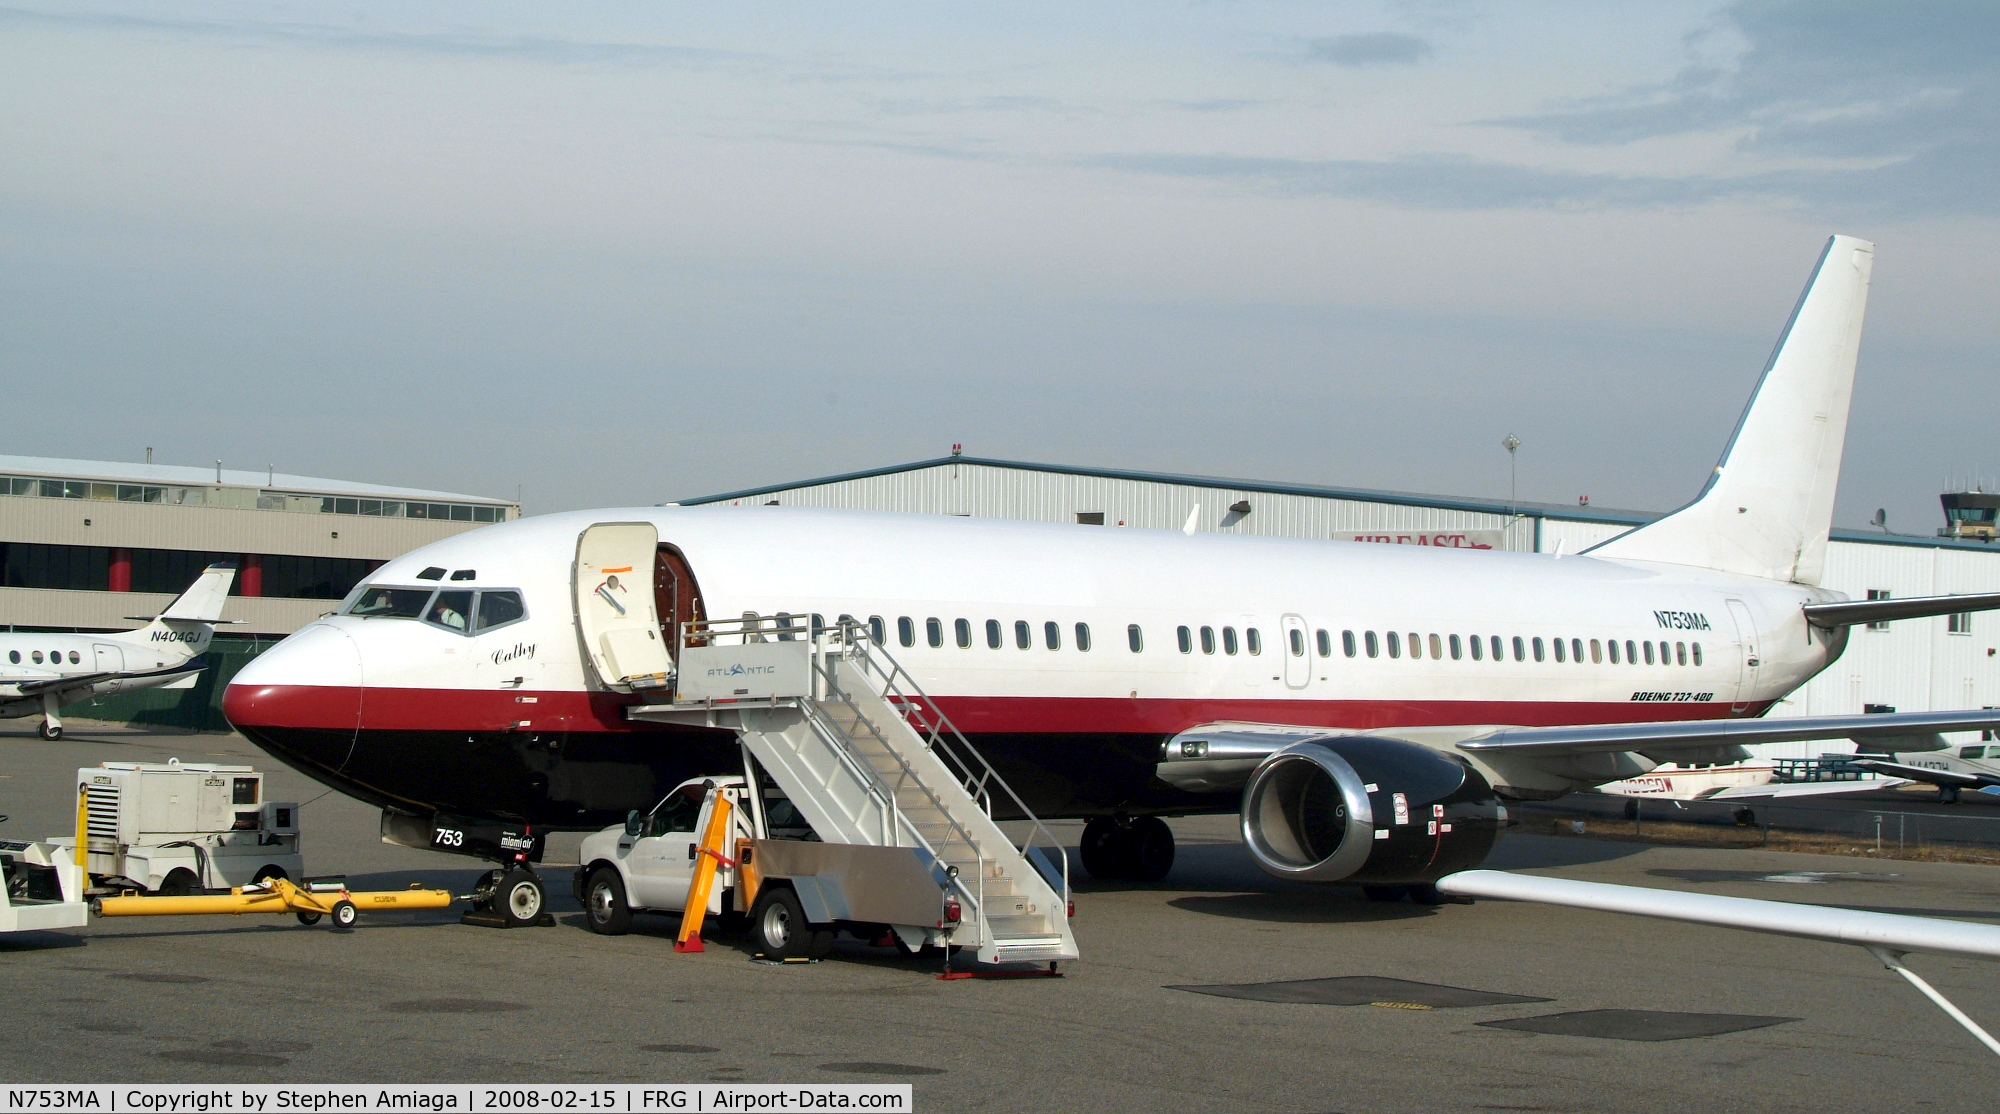 N753MA, 1997 Boeing 737-48E C/N 28053, Parked at Atlantic